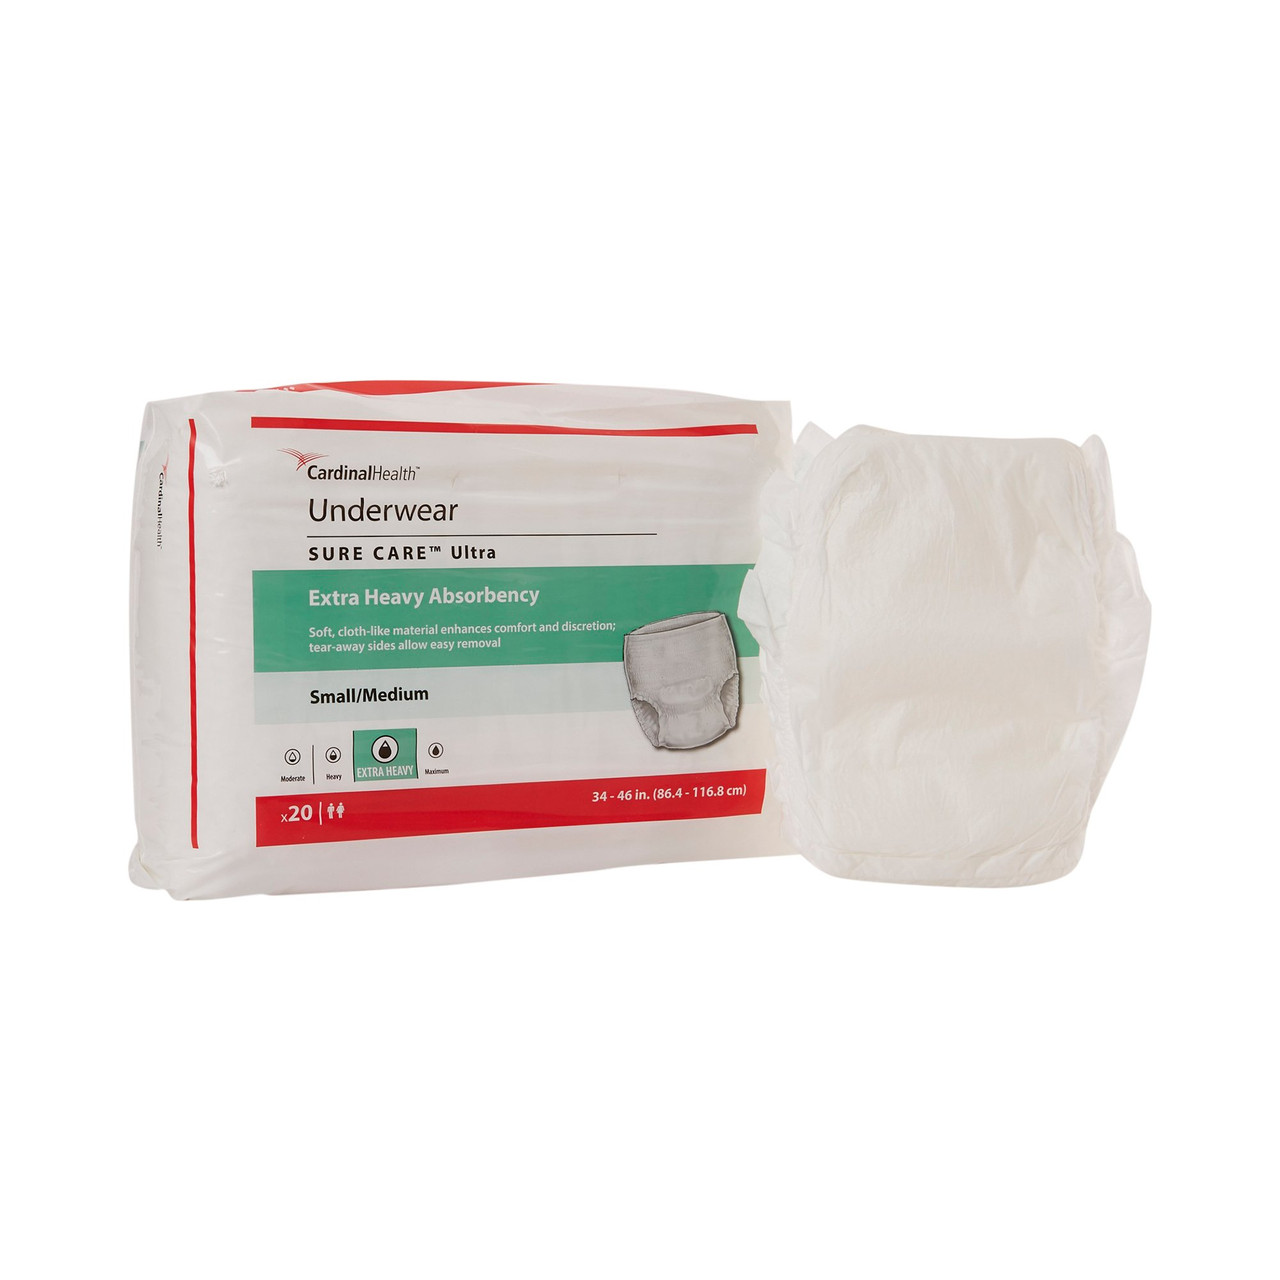 Sure Care Ultra Incontinence Underwear, Extra Heavy Absorbency - Unisex,  Adult - Simply Medical